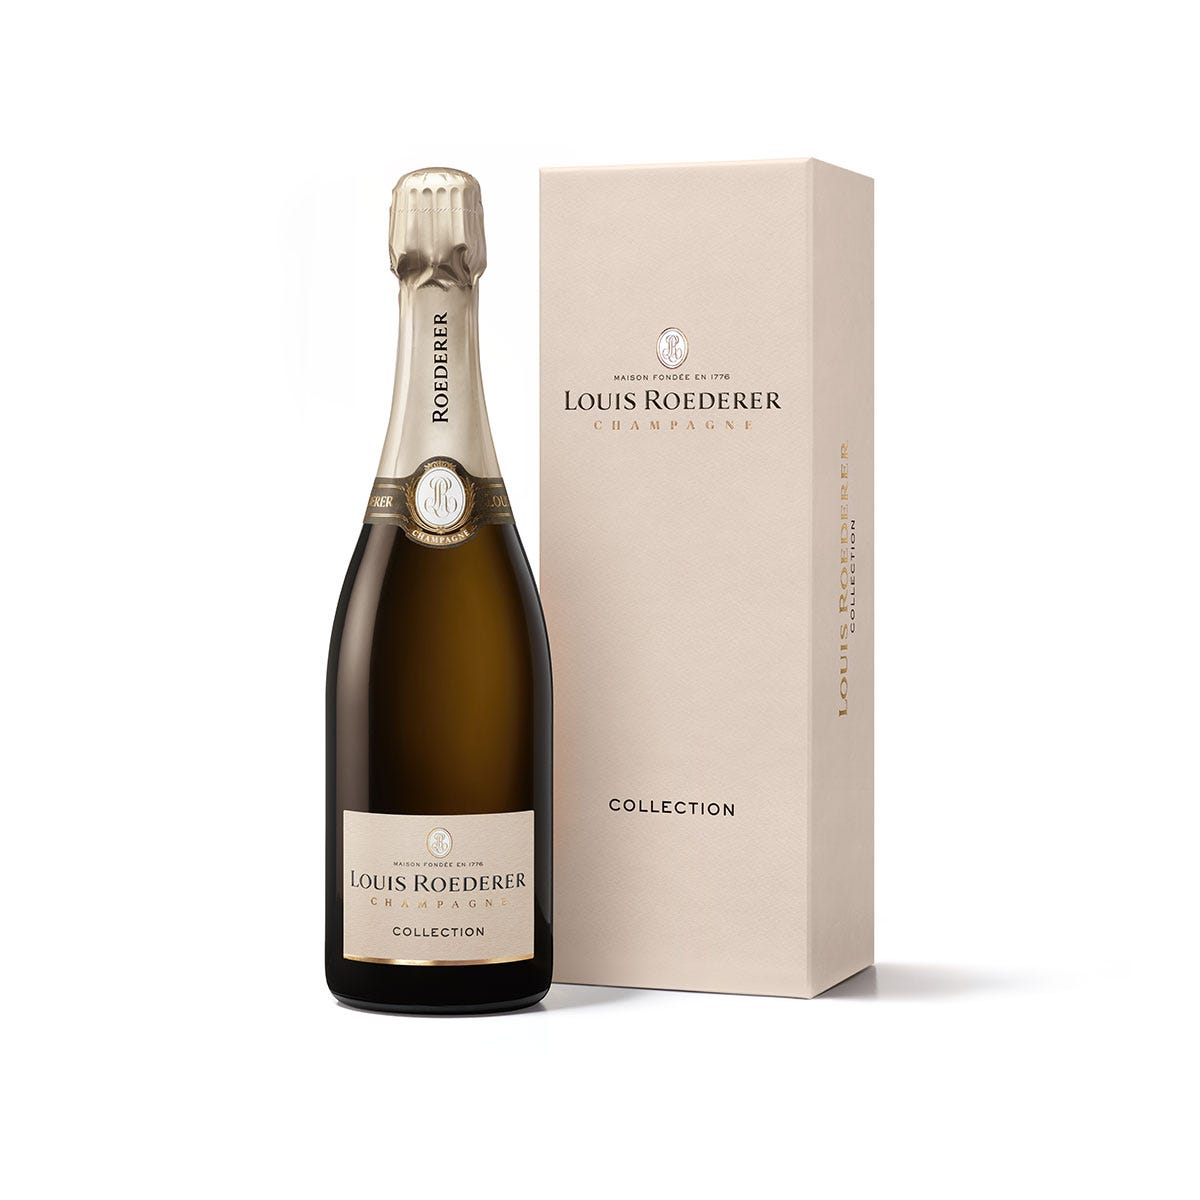 Collection 243 Brut Champagne NV in Gift Box, 75cl, Louis Roederer